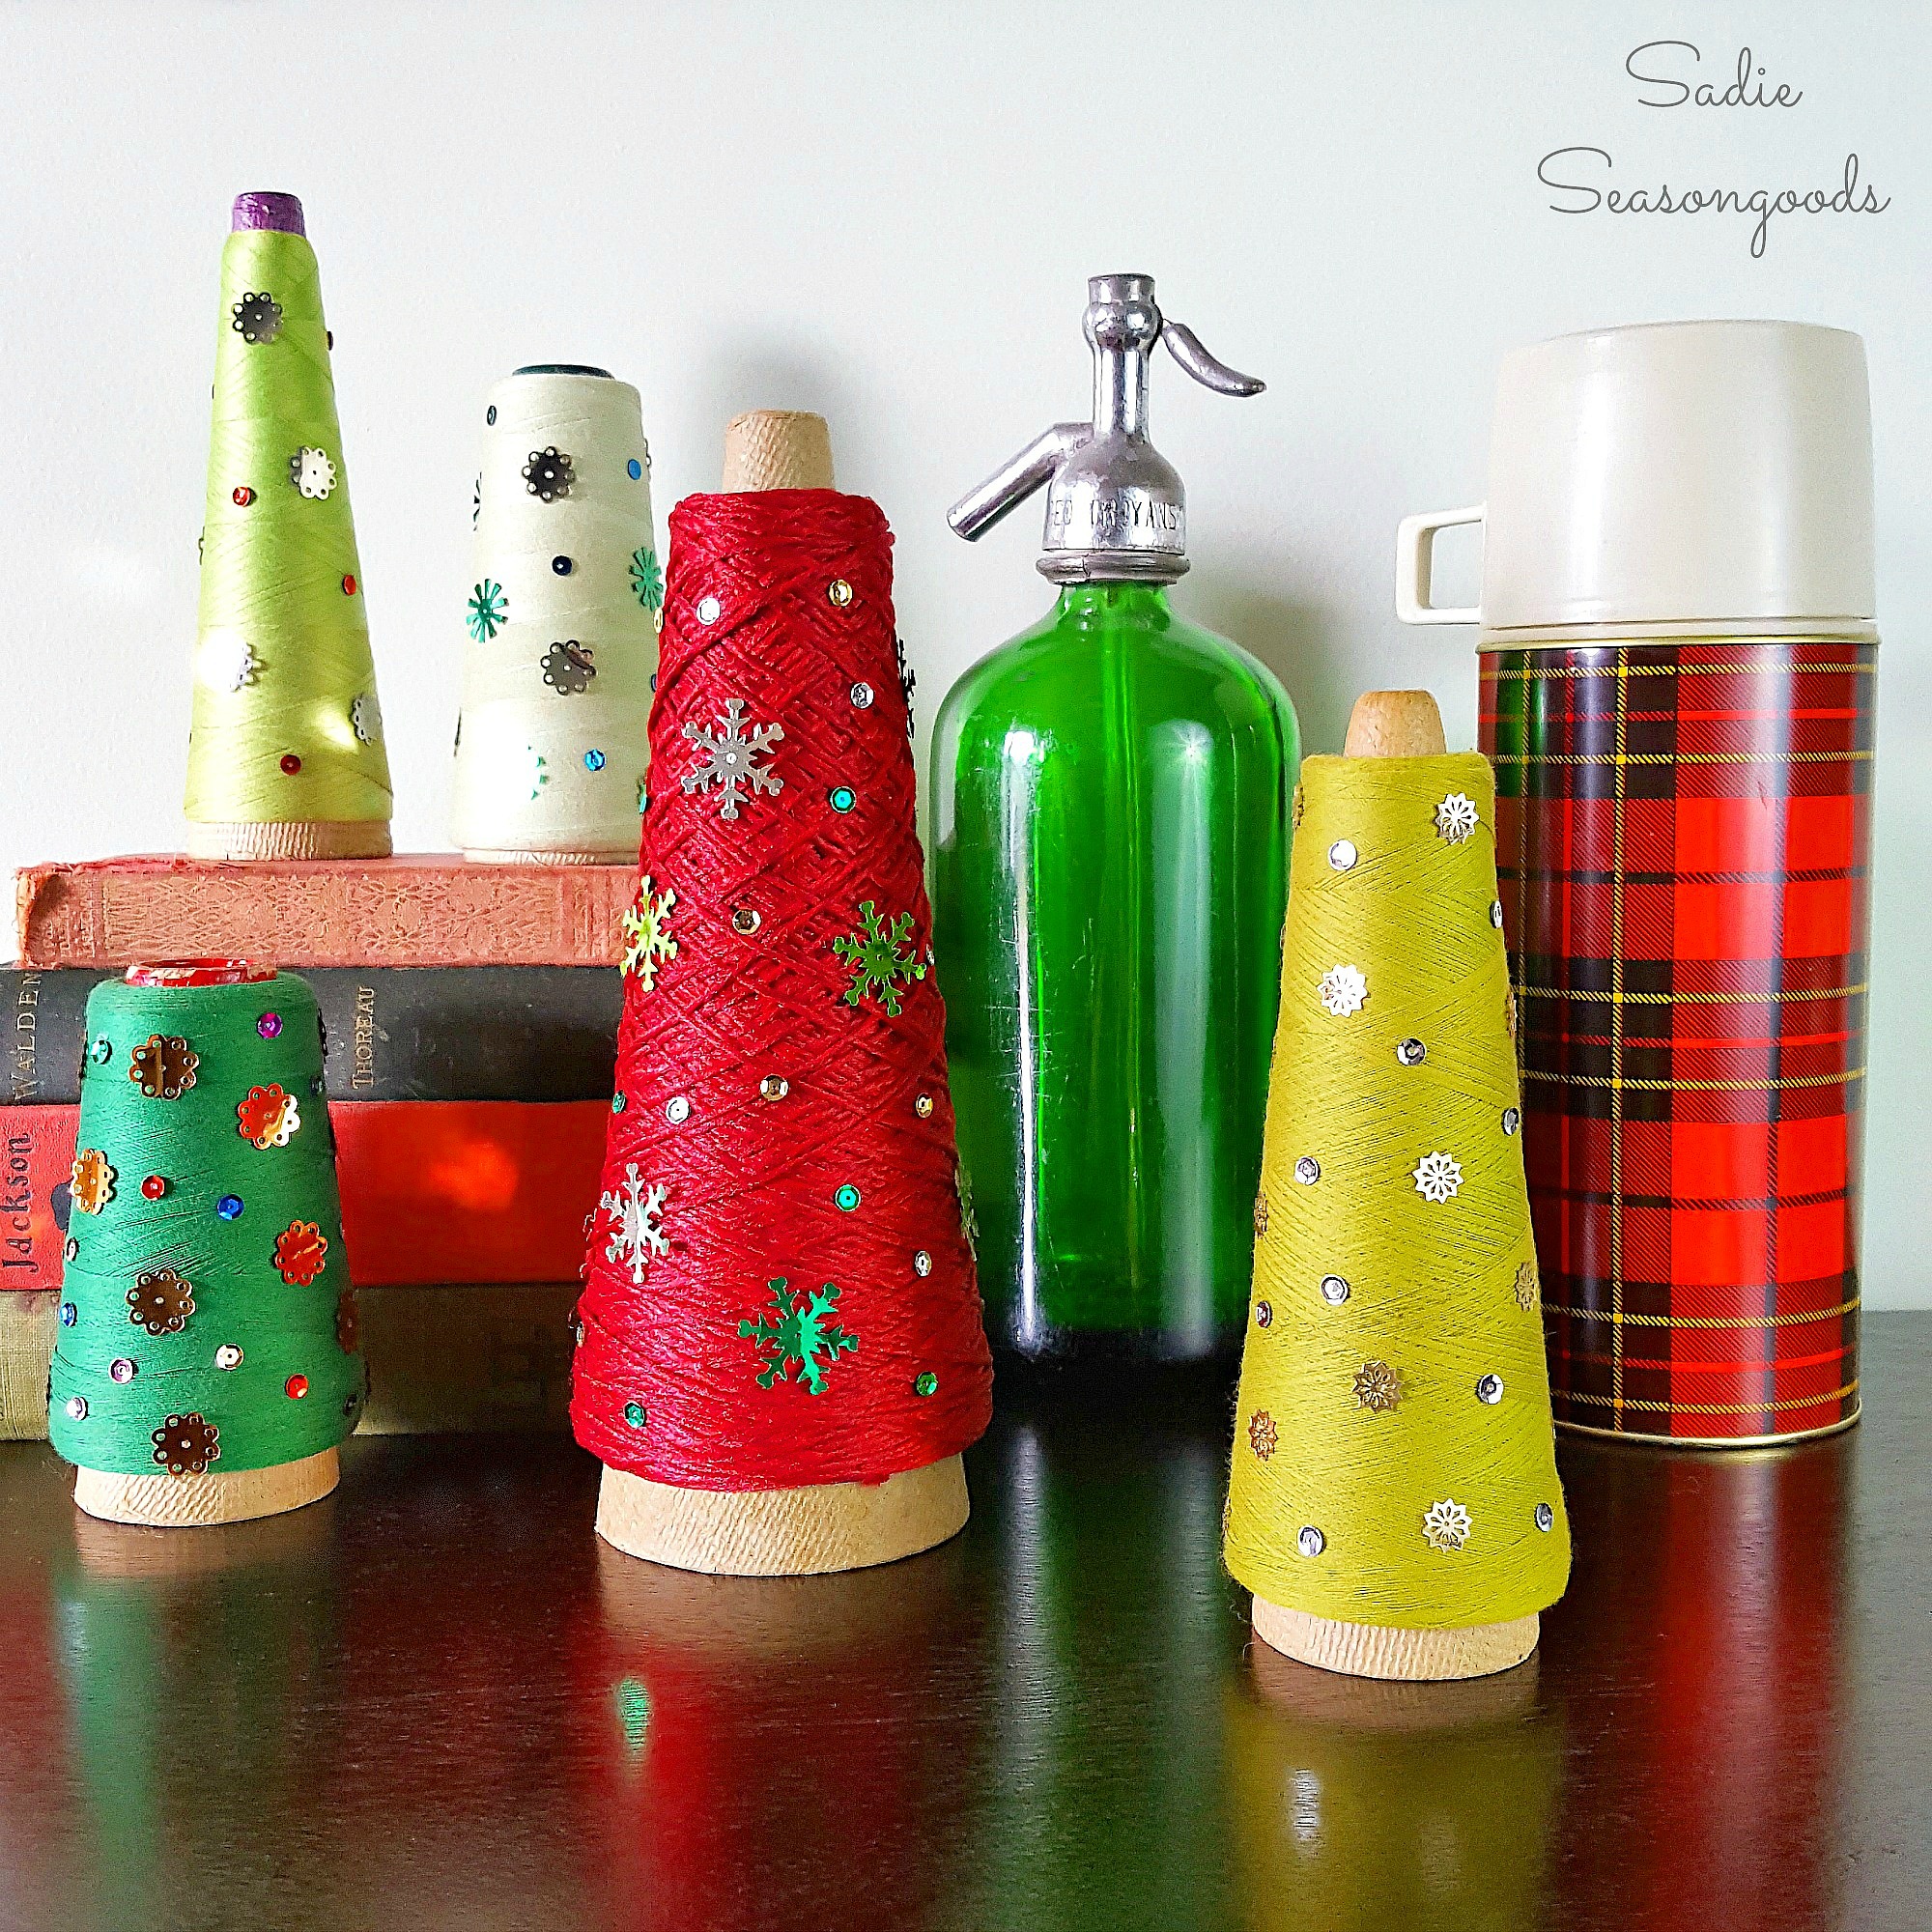 Vintage_serger_cone_thread_repurposed_and_upcycled_as_DIY_Christmas_trees_with_vintage_sequins_holiday_decor_by_Sadie_Seasongoods